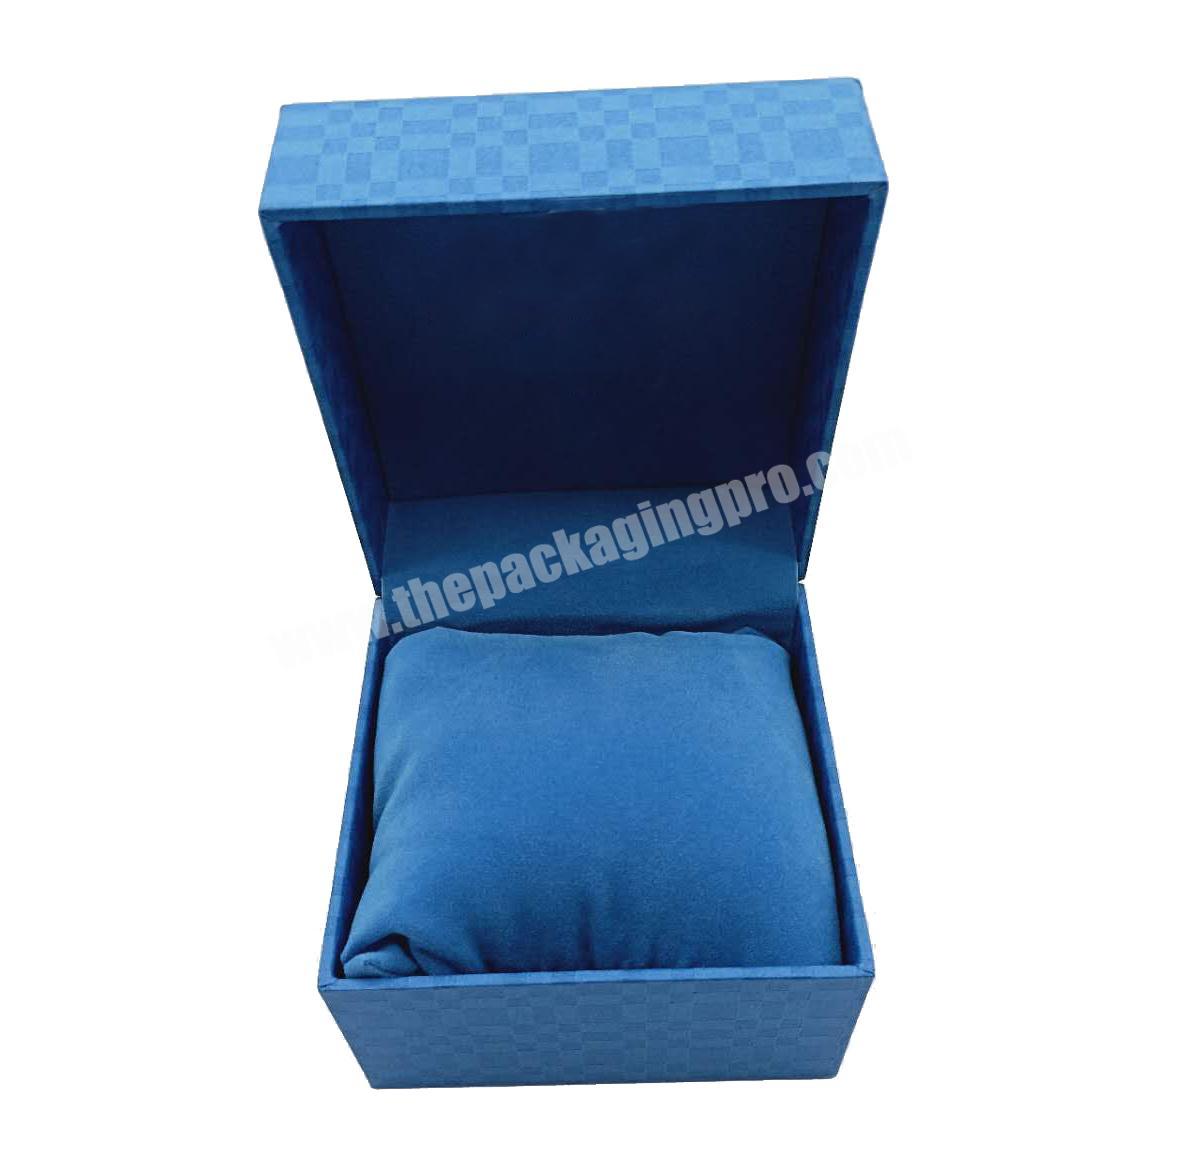 Cheap plastic watch boxes for box